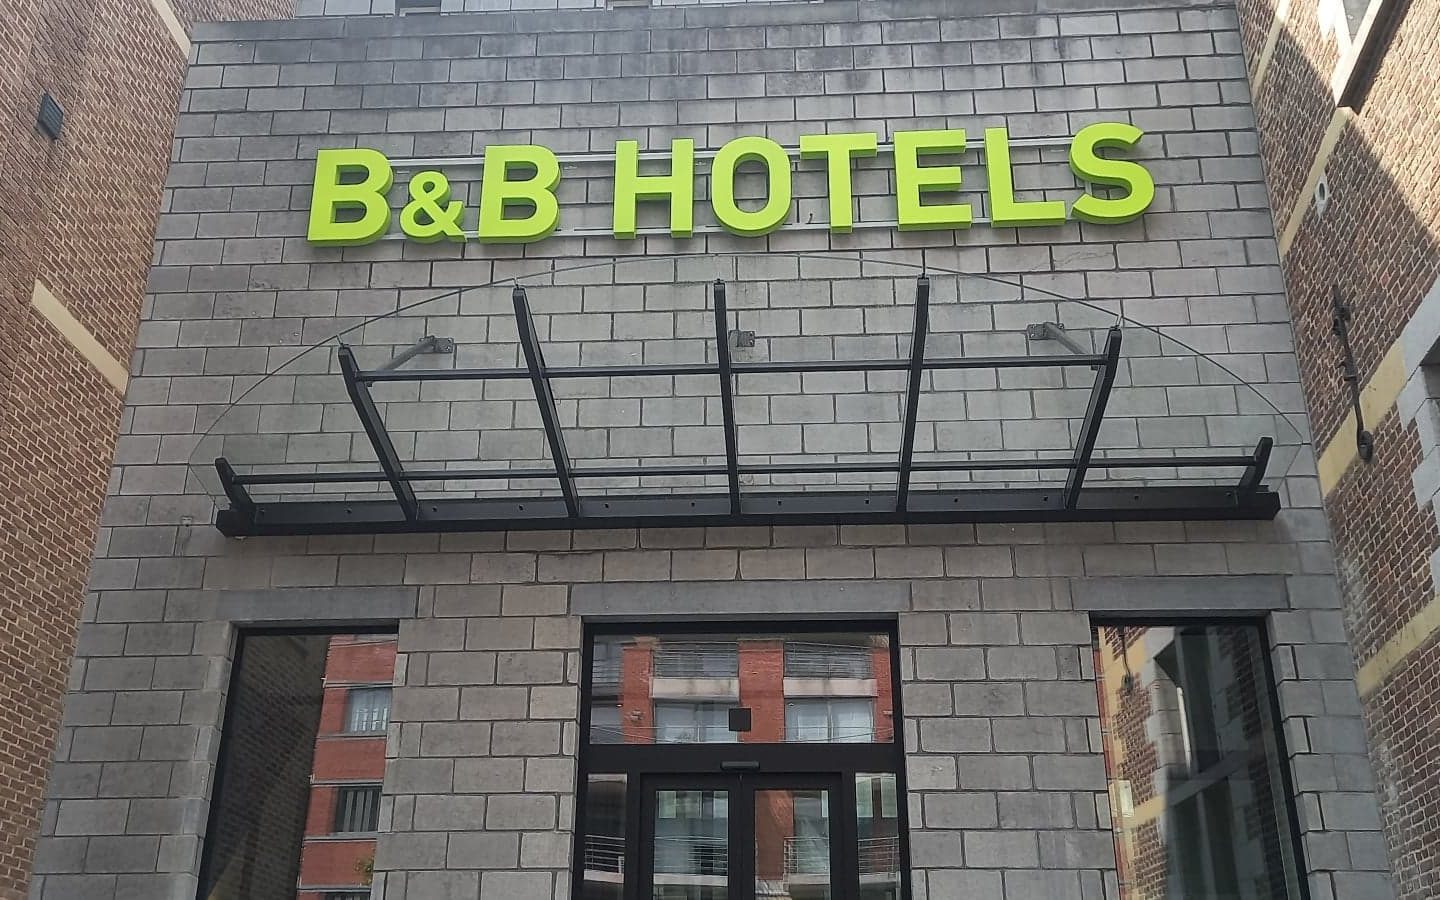 A brand new wheelchair-accessible B&B Hotel in Hasselt. Check ✓.